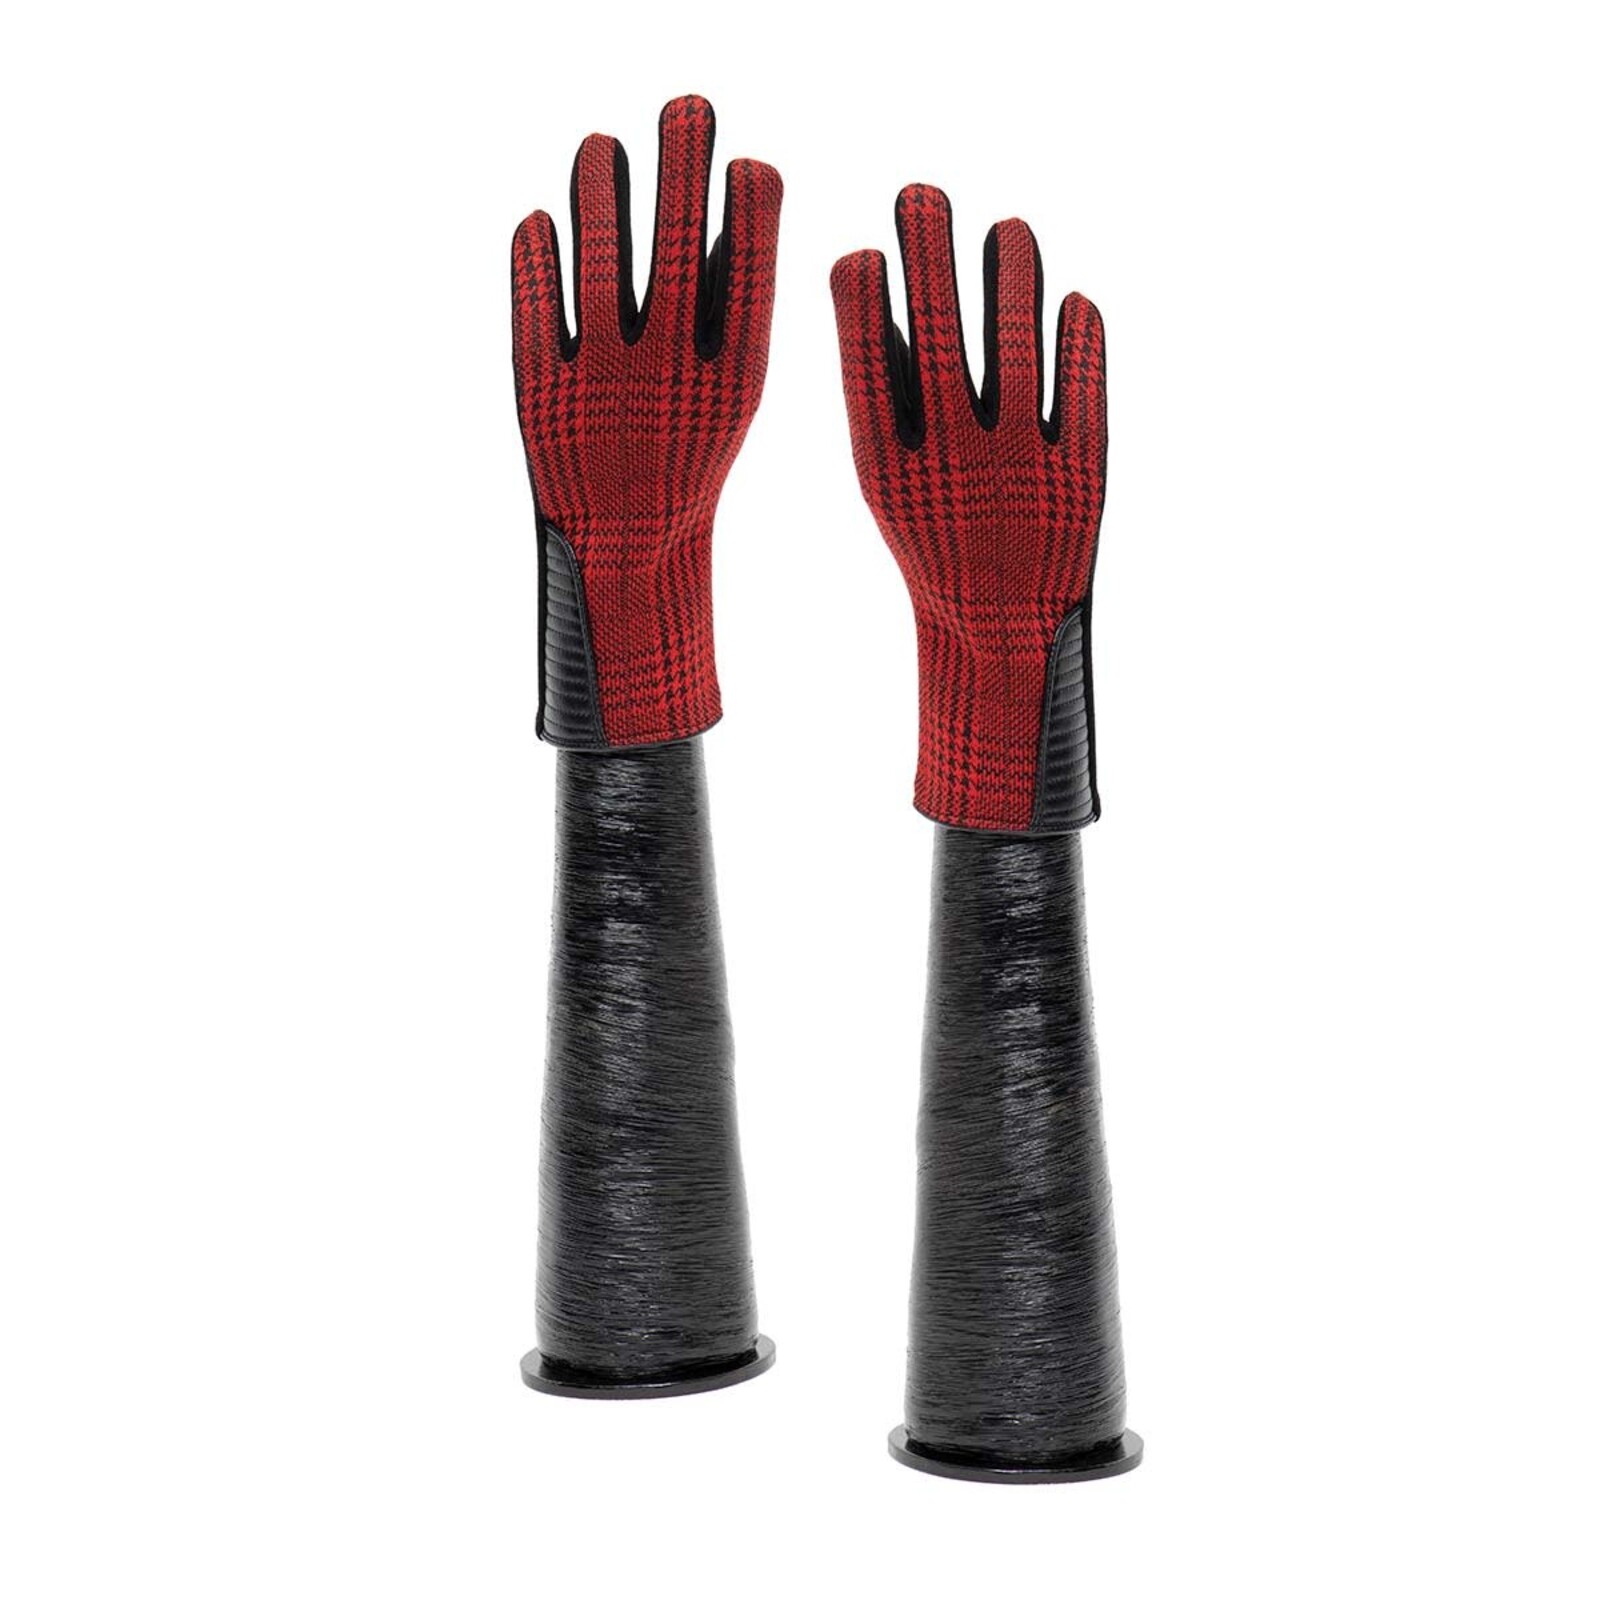 Meravic Red and Black Plaid Gloves with Black Palm   X8034 loading=